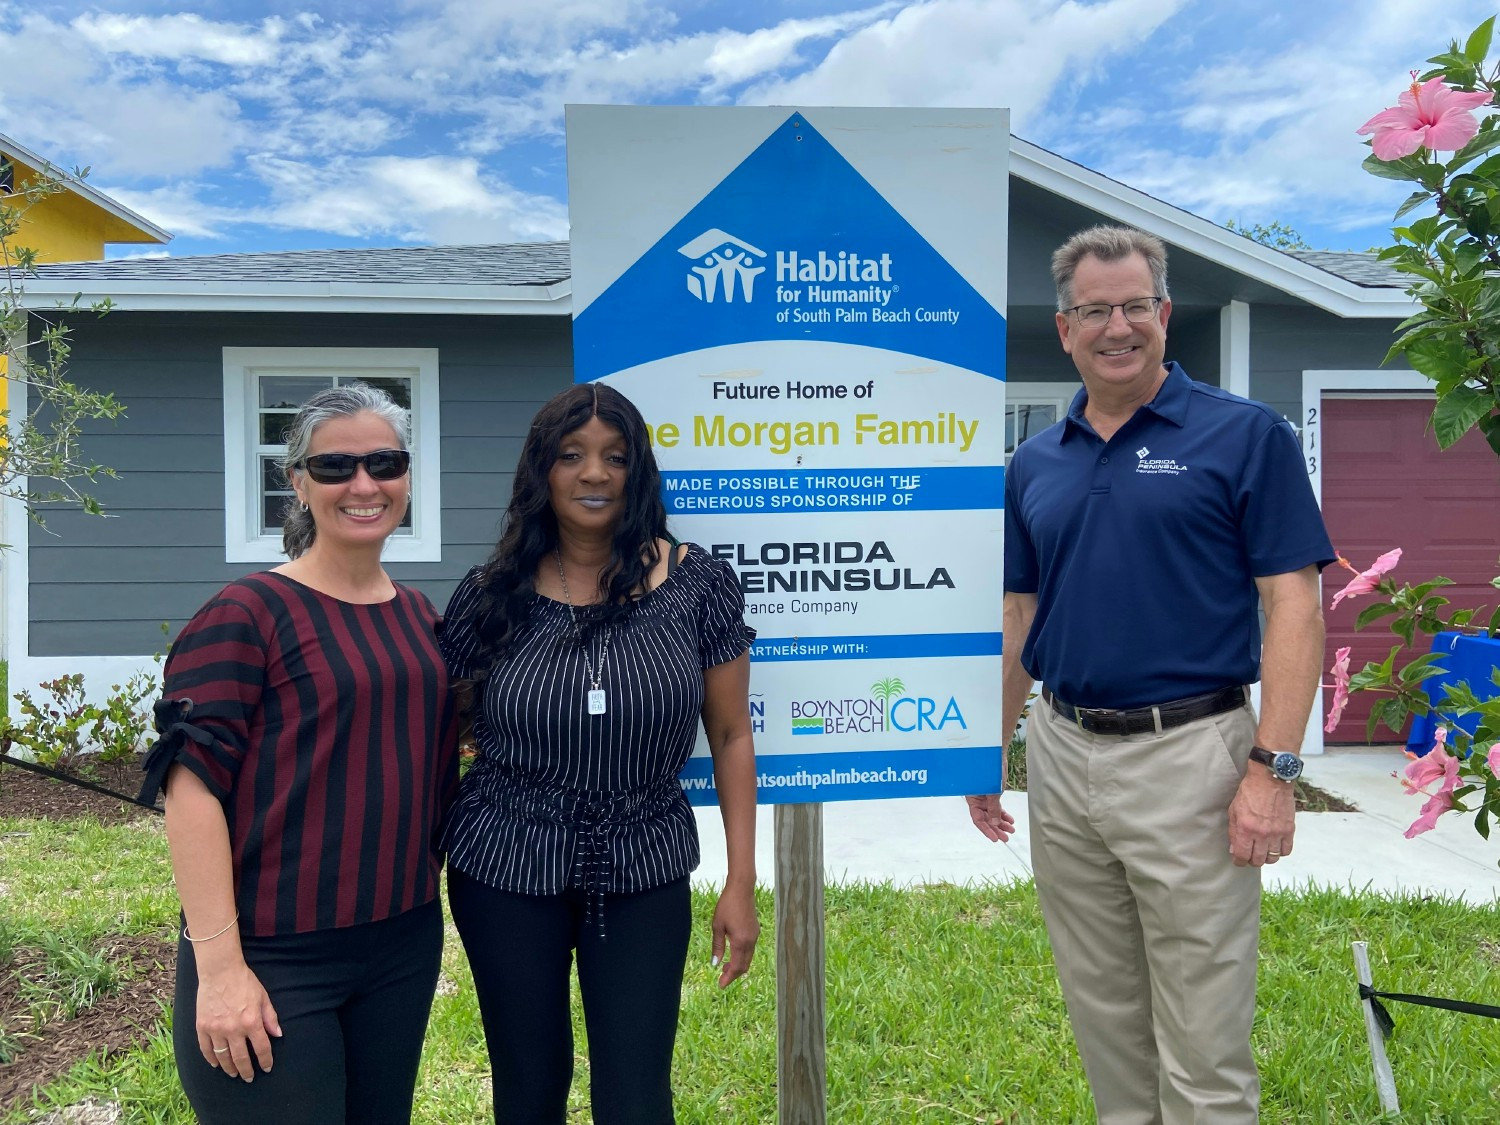 Our CEO, Paul Adkins, giving the keys to a new owner of a Habitat for Humanity home we sponsored in Palm Beach county. 